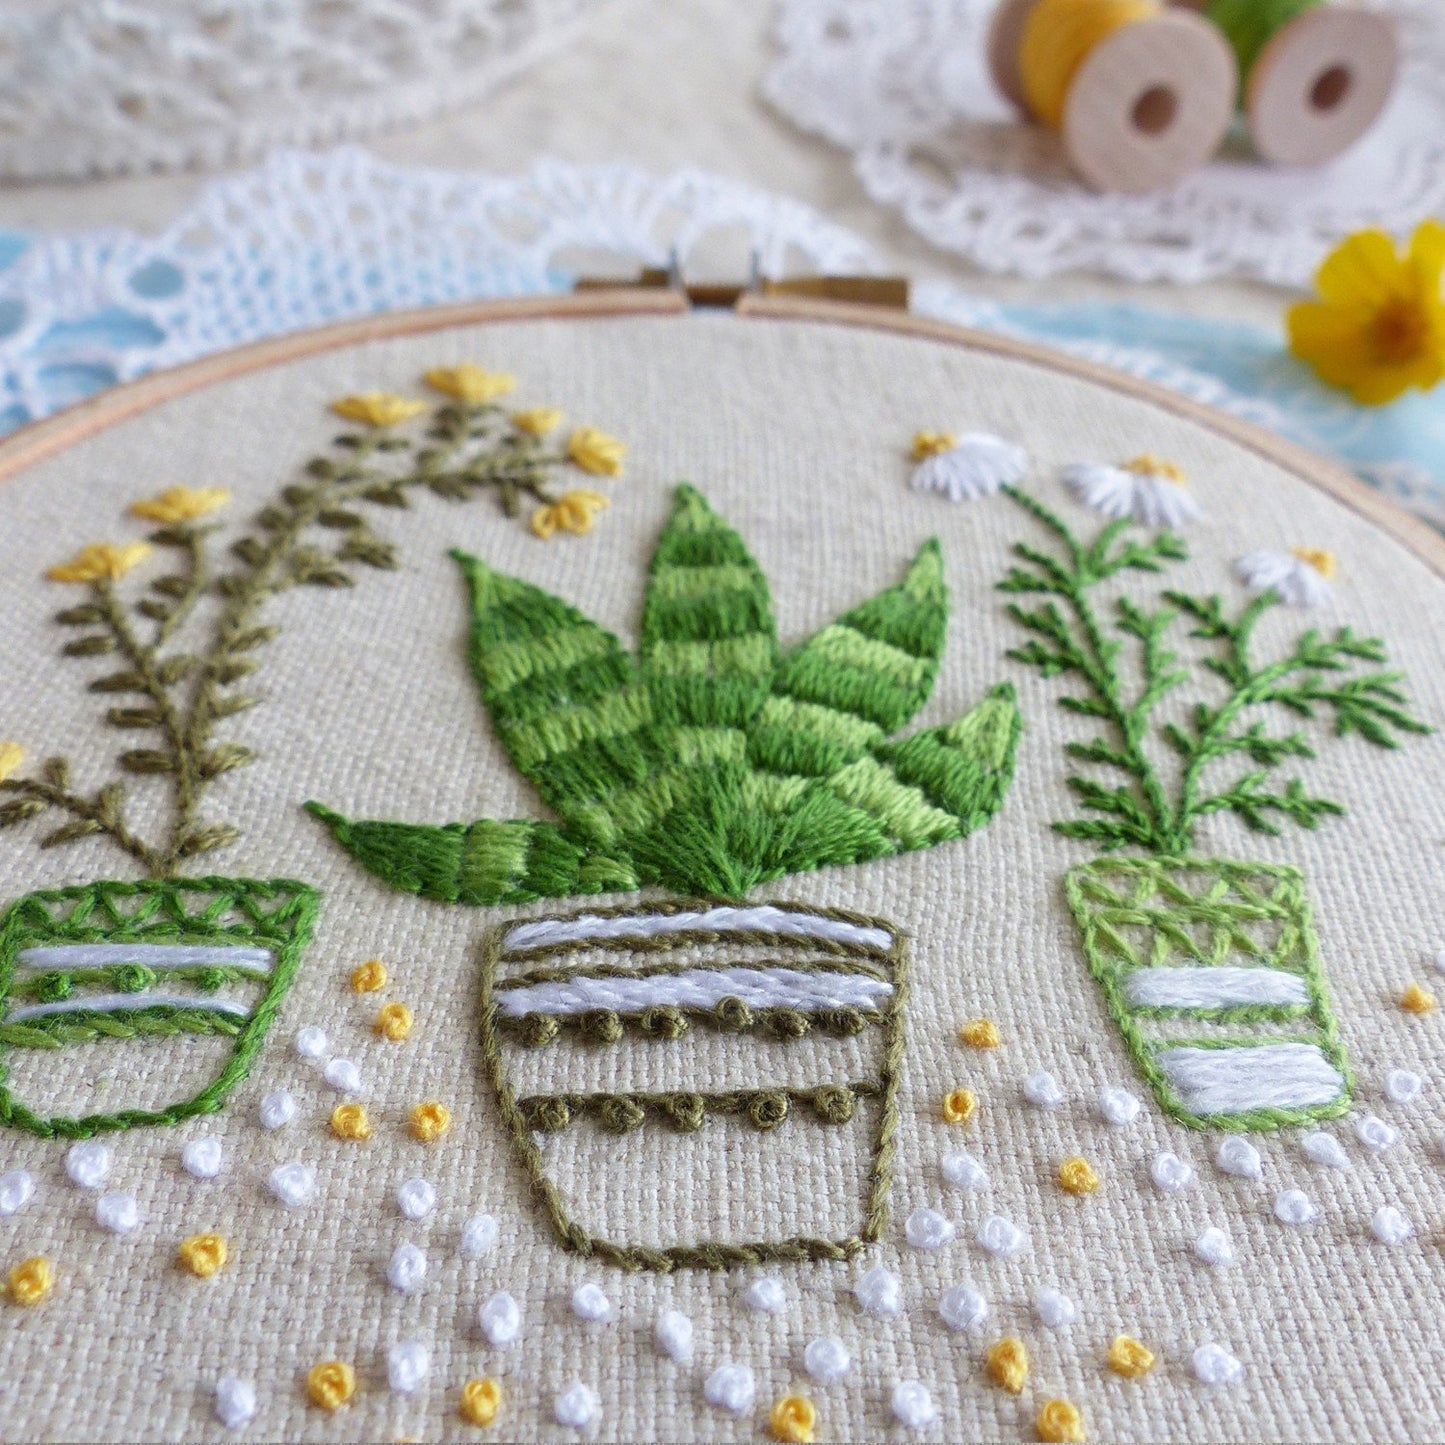 House Plants embroidery kit